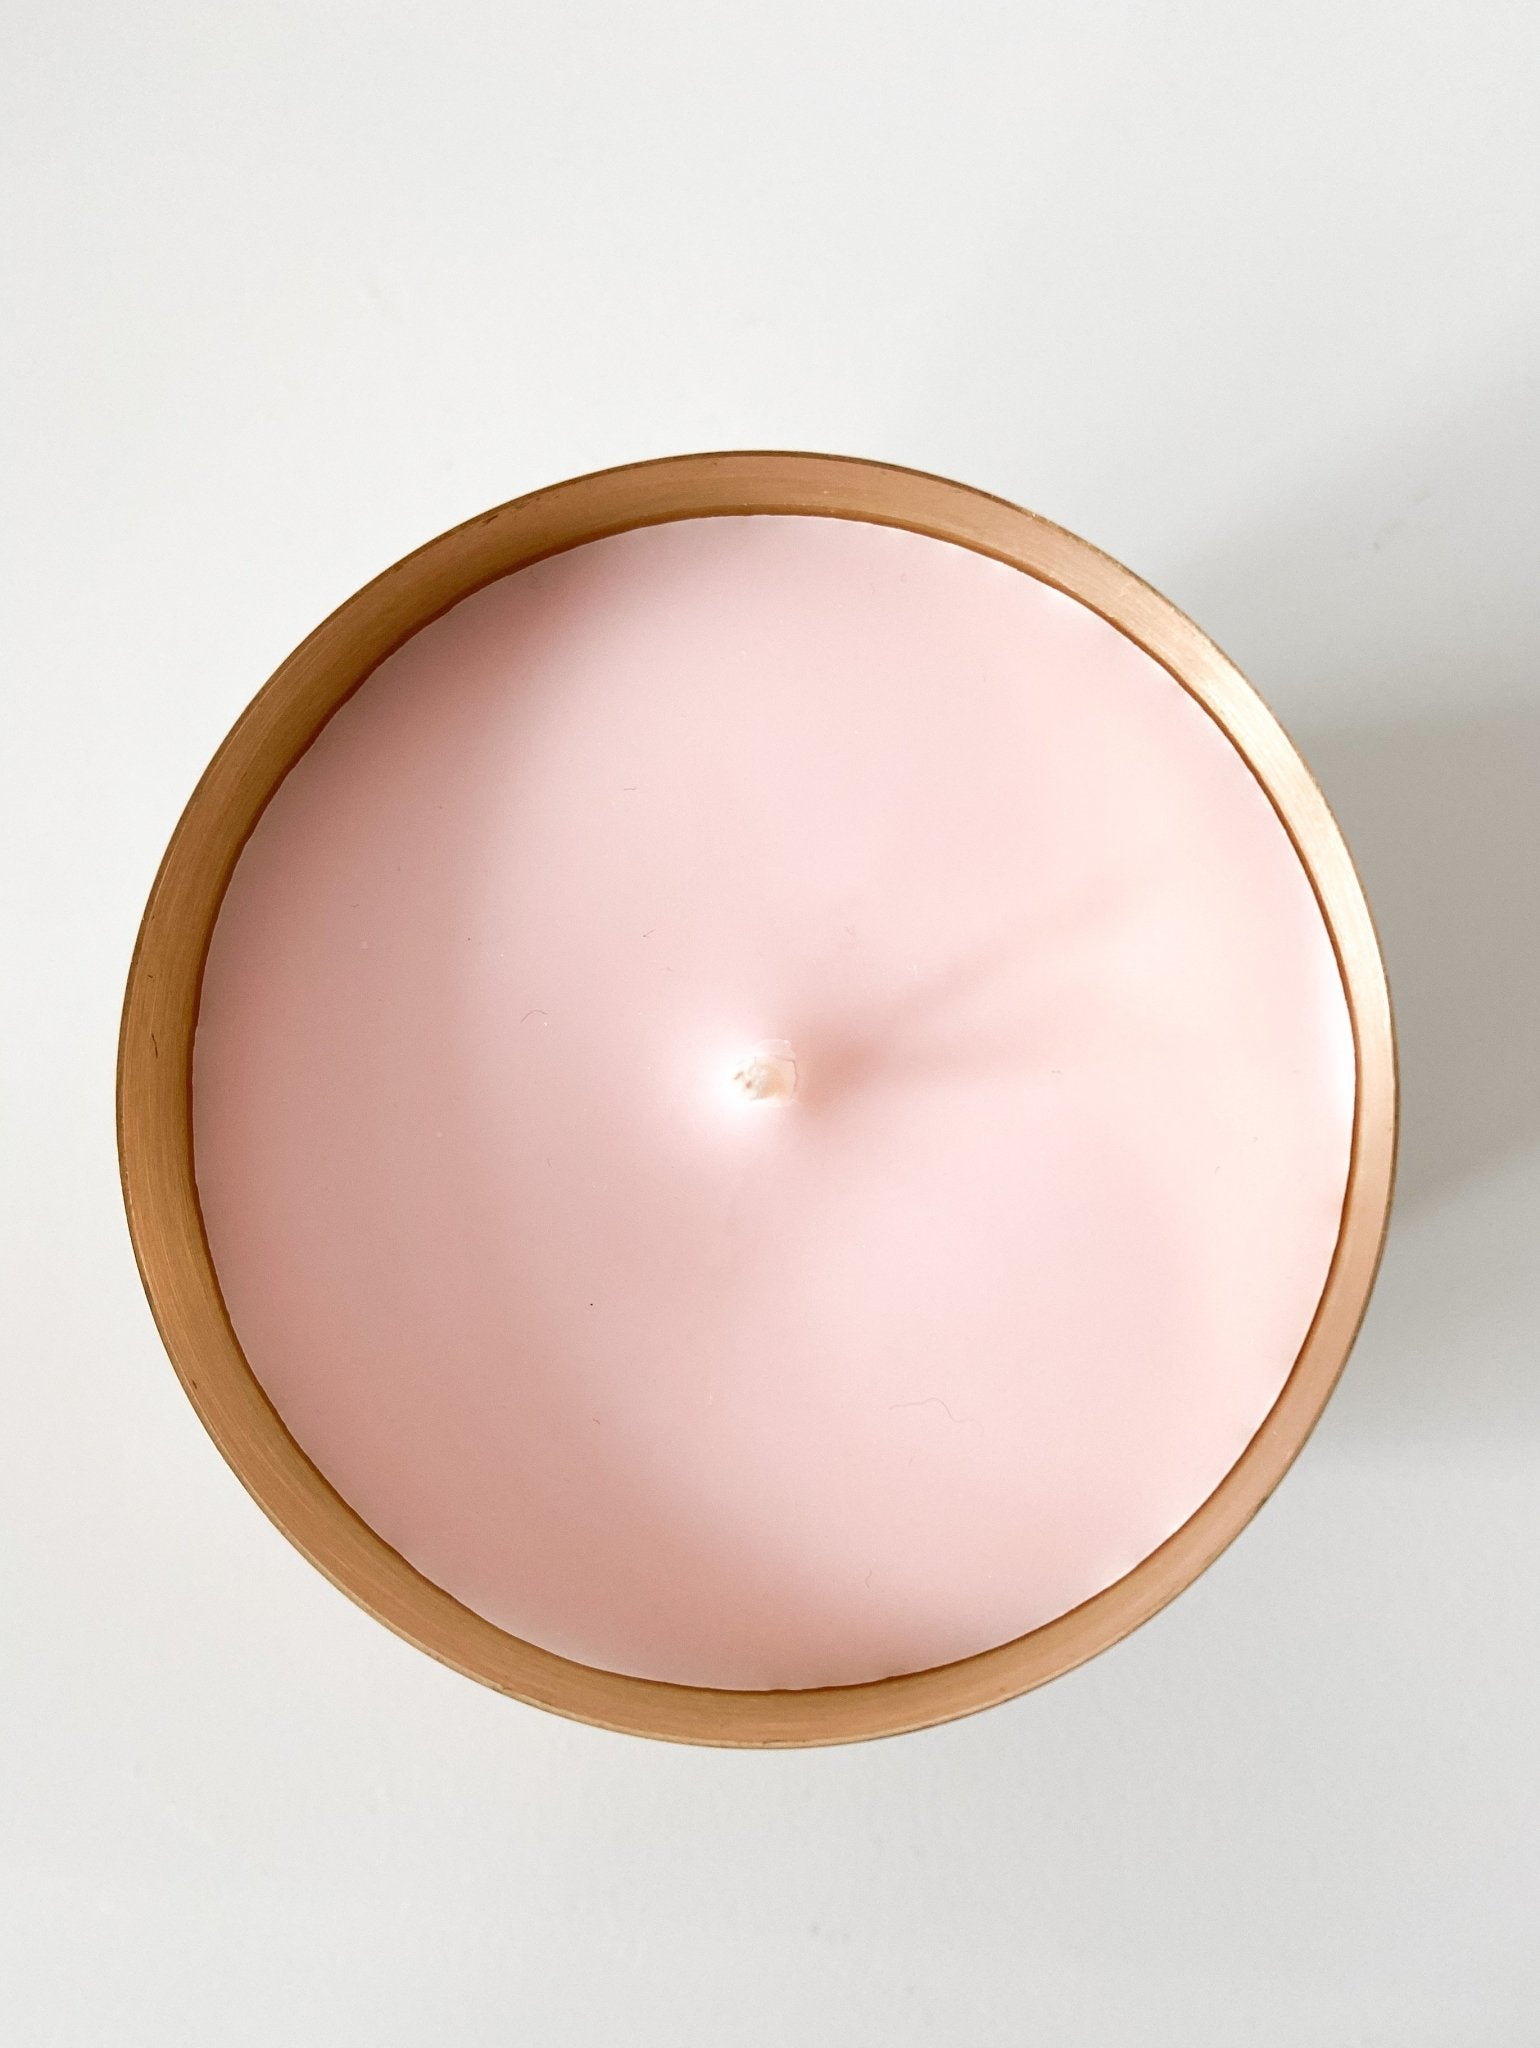 Make Scents of it Candle - Brass with Blush Wax - Tobacco Oud - Norsu Interiors (6802372788412)